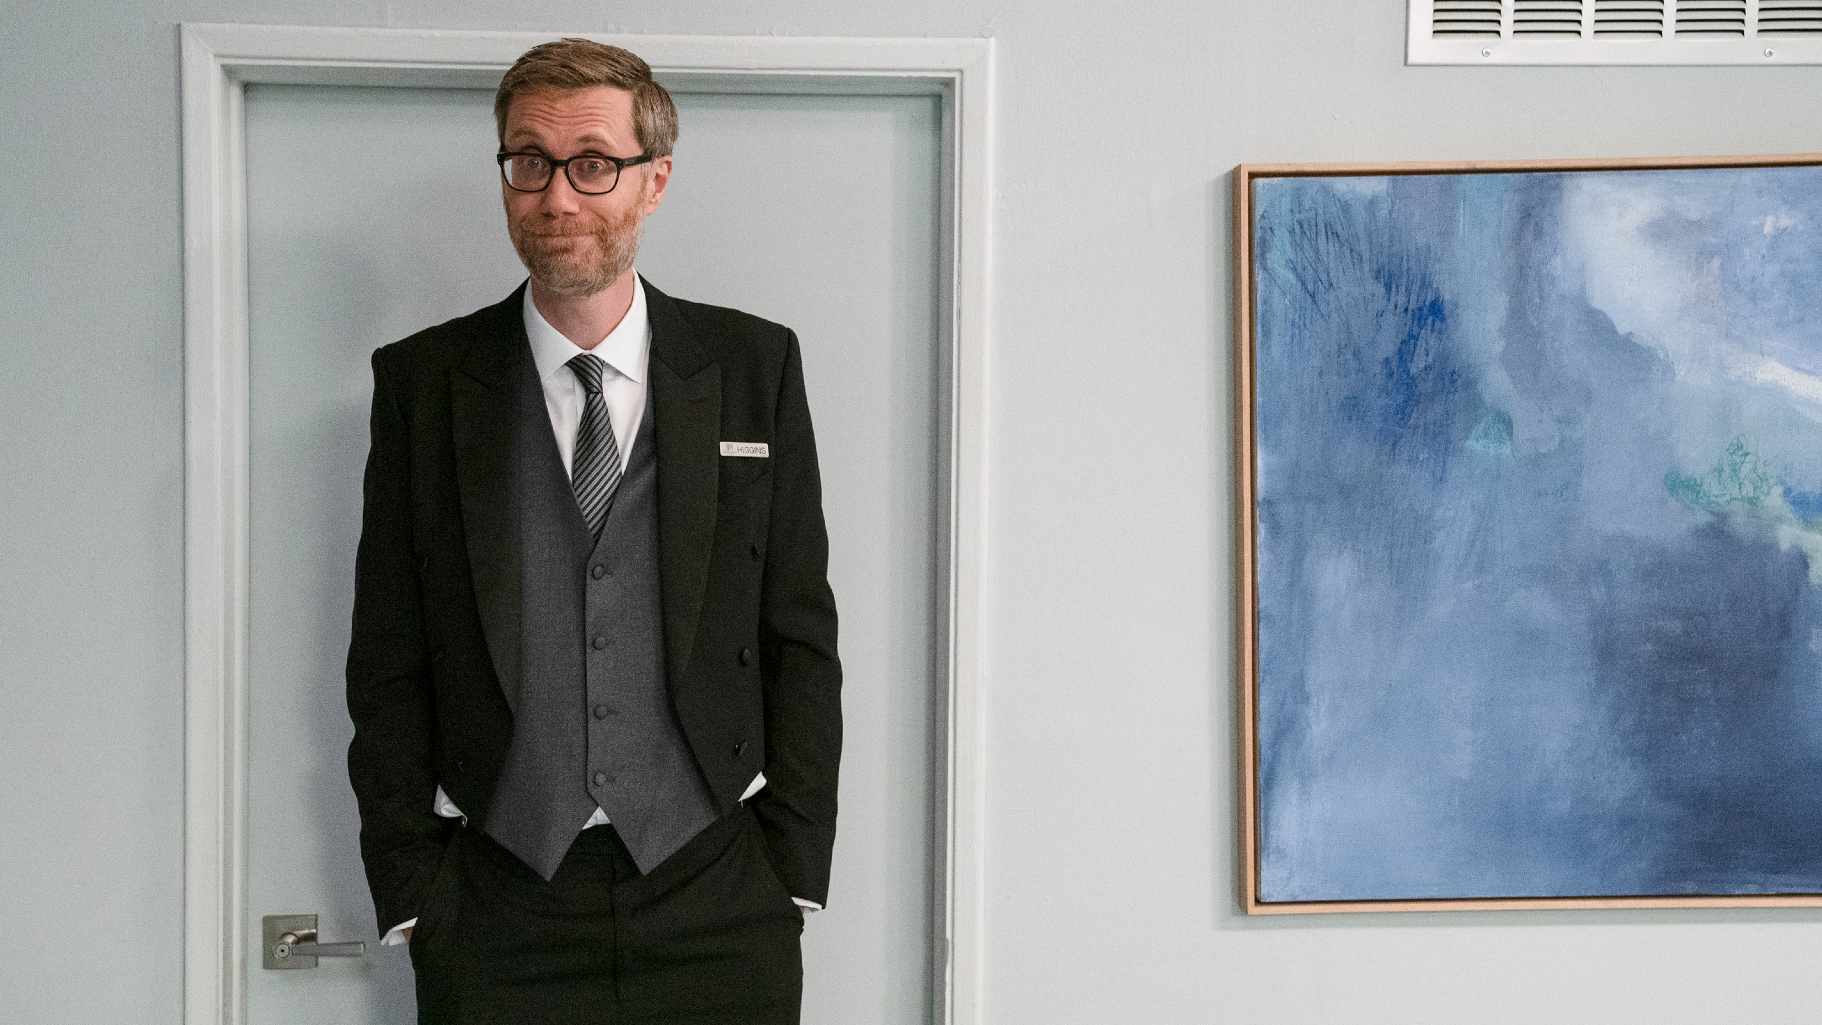 Stephen Merchant, writer, director and star of The Offenders